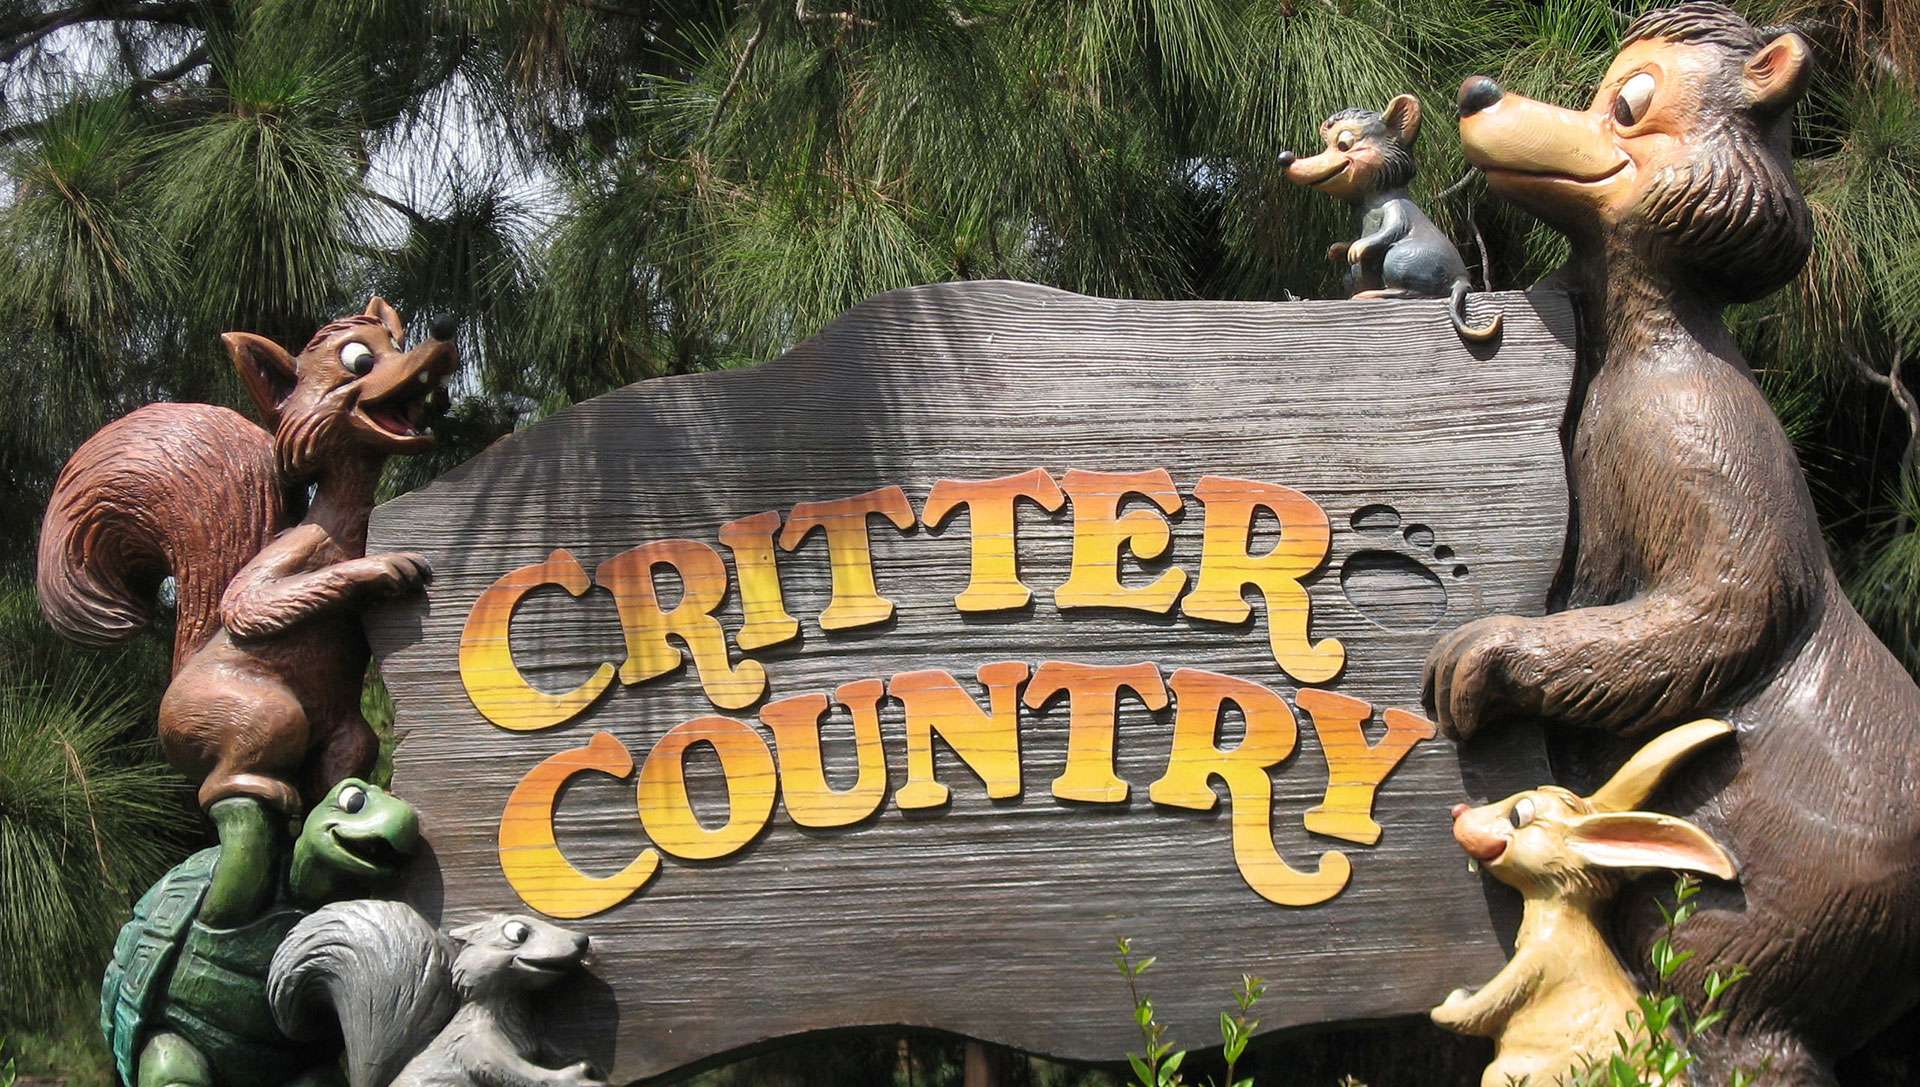 Welcome to Critter Country sign